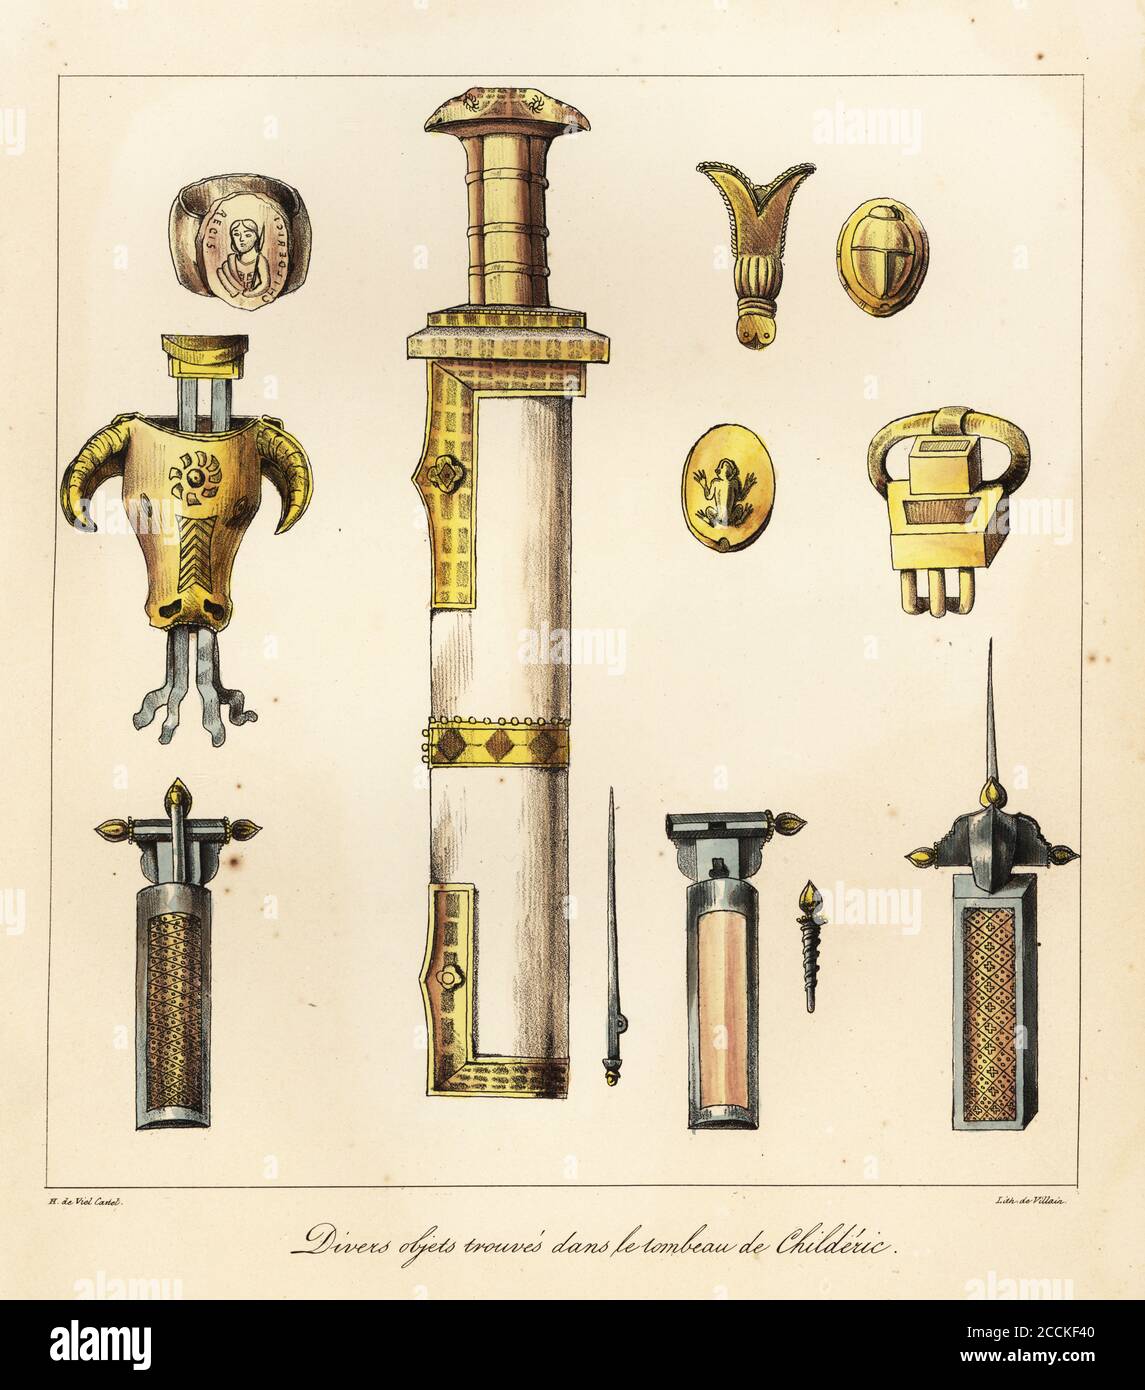 Sword, scabbard, signet ring, buckle and other objects found in the tomb of Childeric I (c.437-481), Frankish leader in the northern part of imperial Roman Gaul, Merovingian dynasty. Divers objets trouves dans le tombeau de Childeric. Handcoloured lithograph by Villain after an illustration by Horace de Viel-Castel from his Collection des costumes, armes et meubles pour servir à l'histoire de la France (Collection of costumes, weapons and furniture to be used in the history of France), Treuttel & Wurtz, Bossange, 1827. Stock Photo